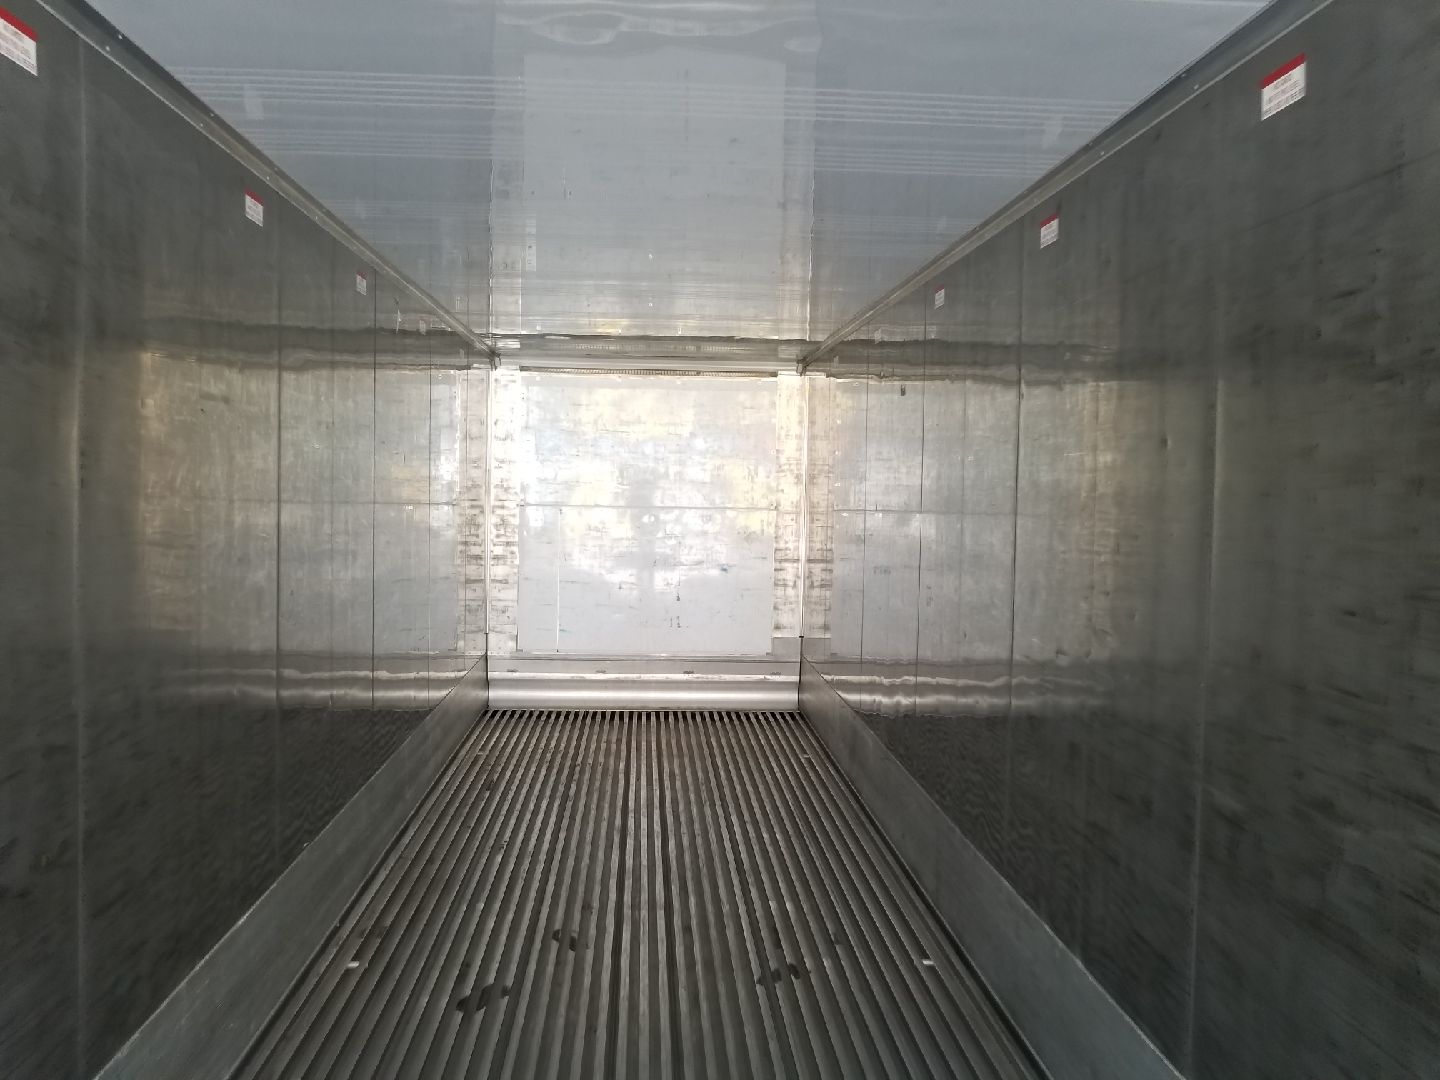 40 Foot Refrigerated Container Interior